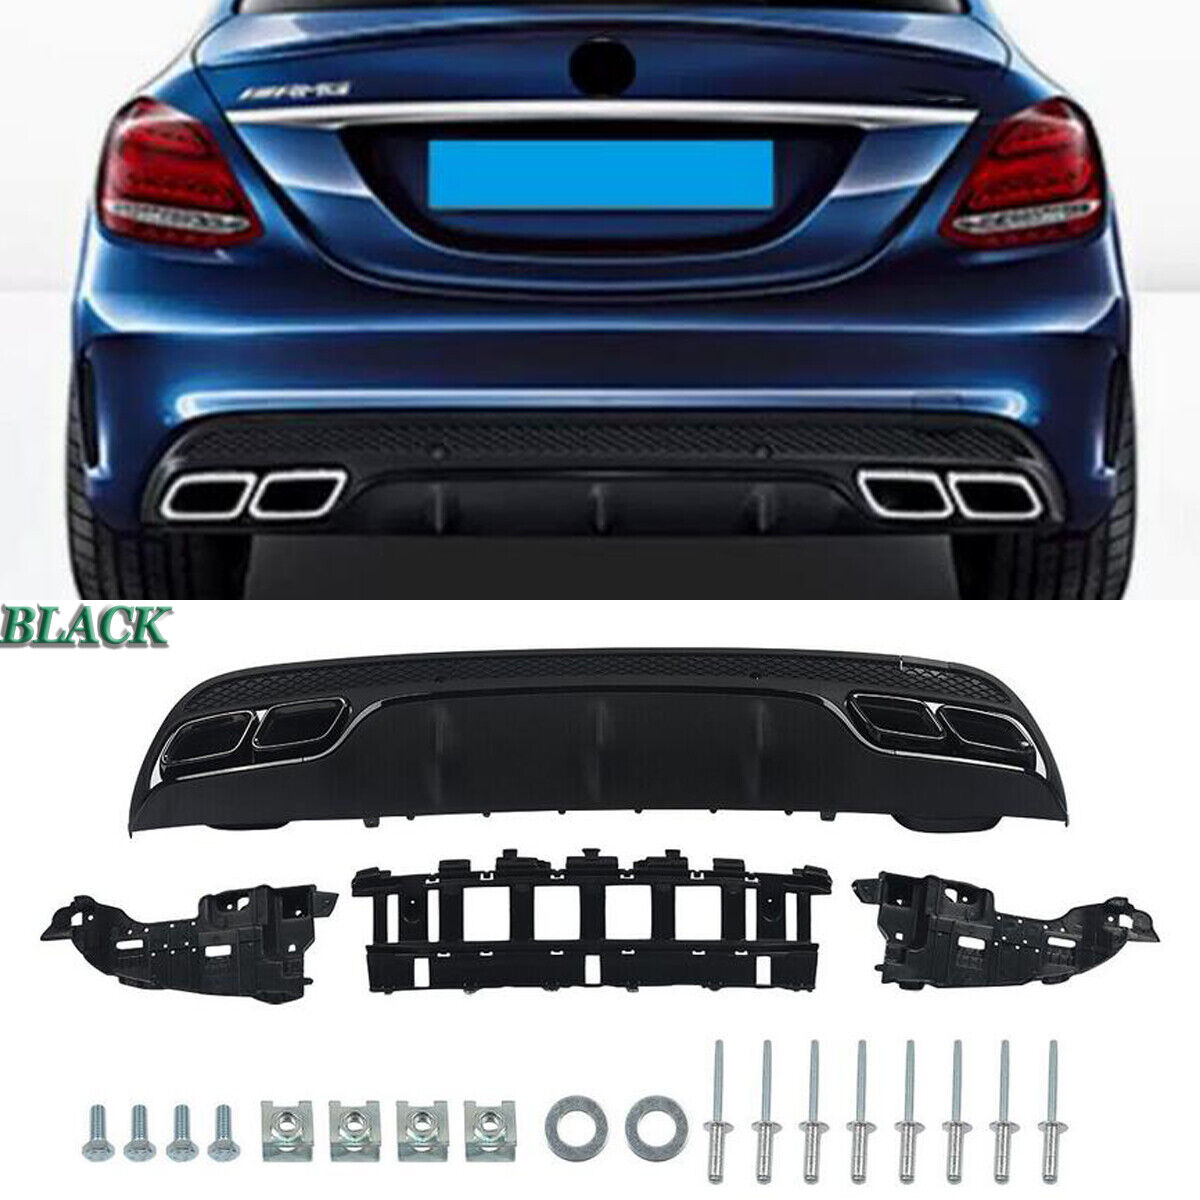 C63 AMG Rear Bumper Diffuser W/Exhaust Tips For 2015-2018 Mercedes W205 C-CLASS